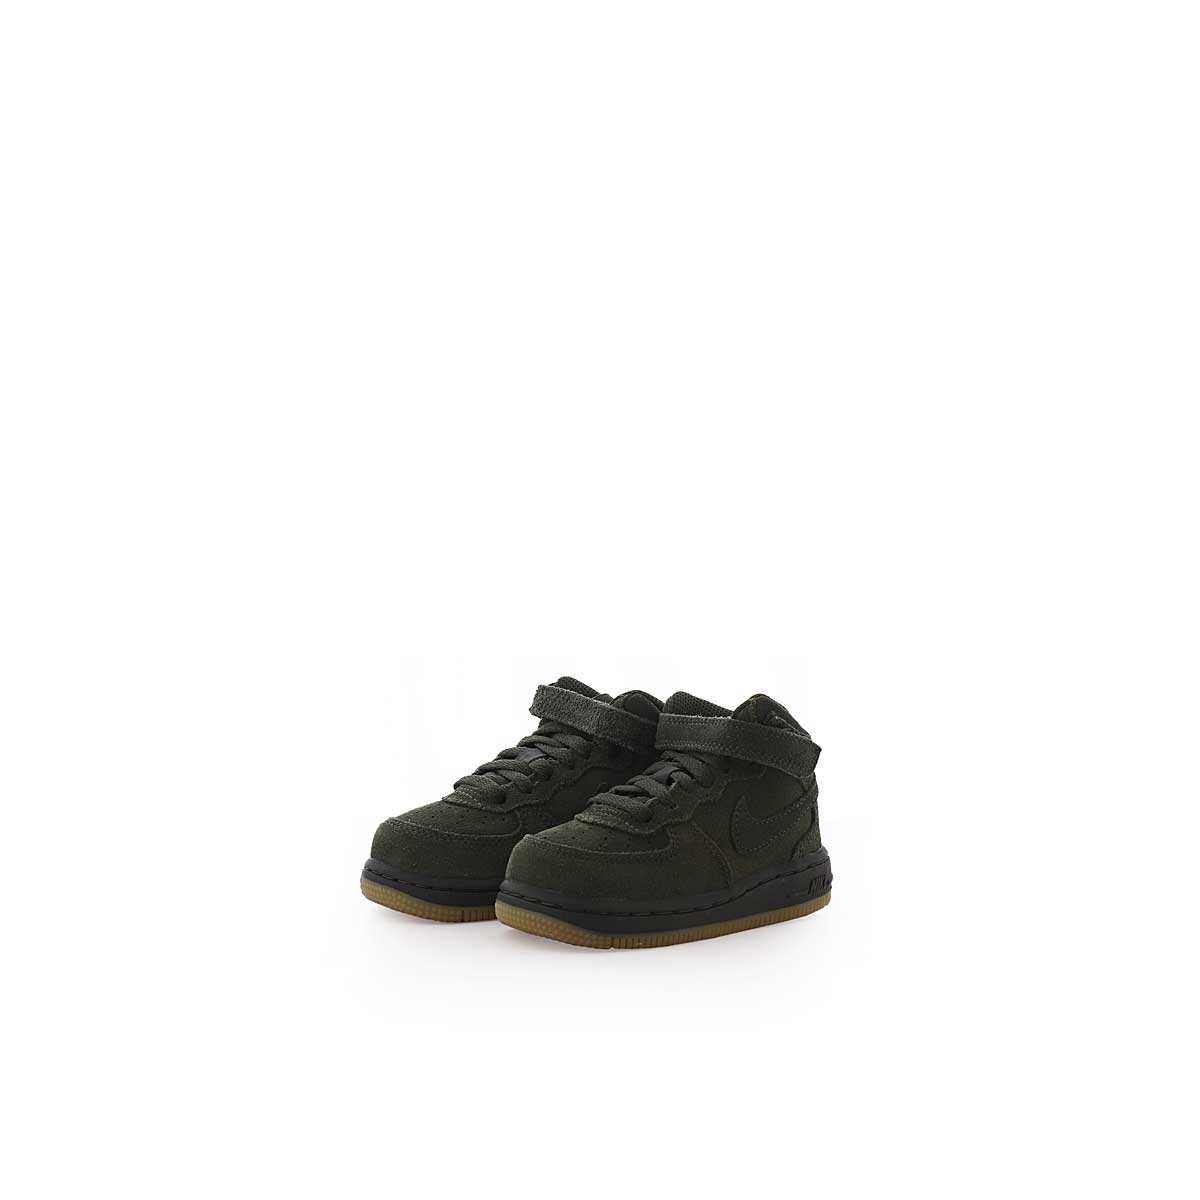 Buy FORCE 1 MID LV8 (TD) for N/A 0.0 on 